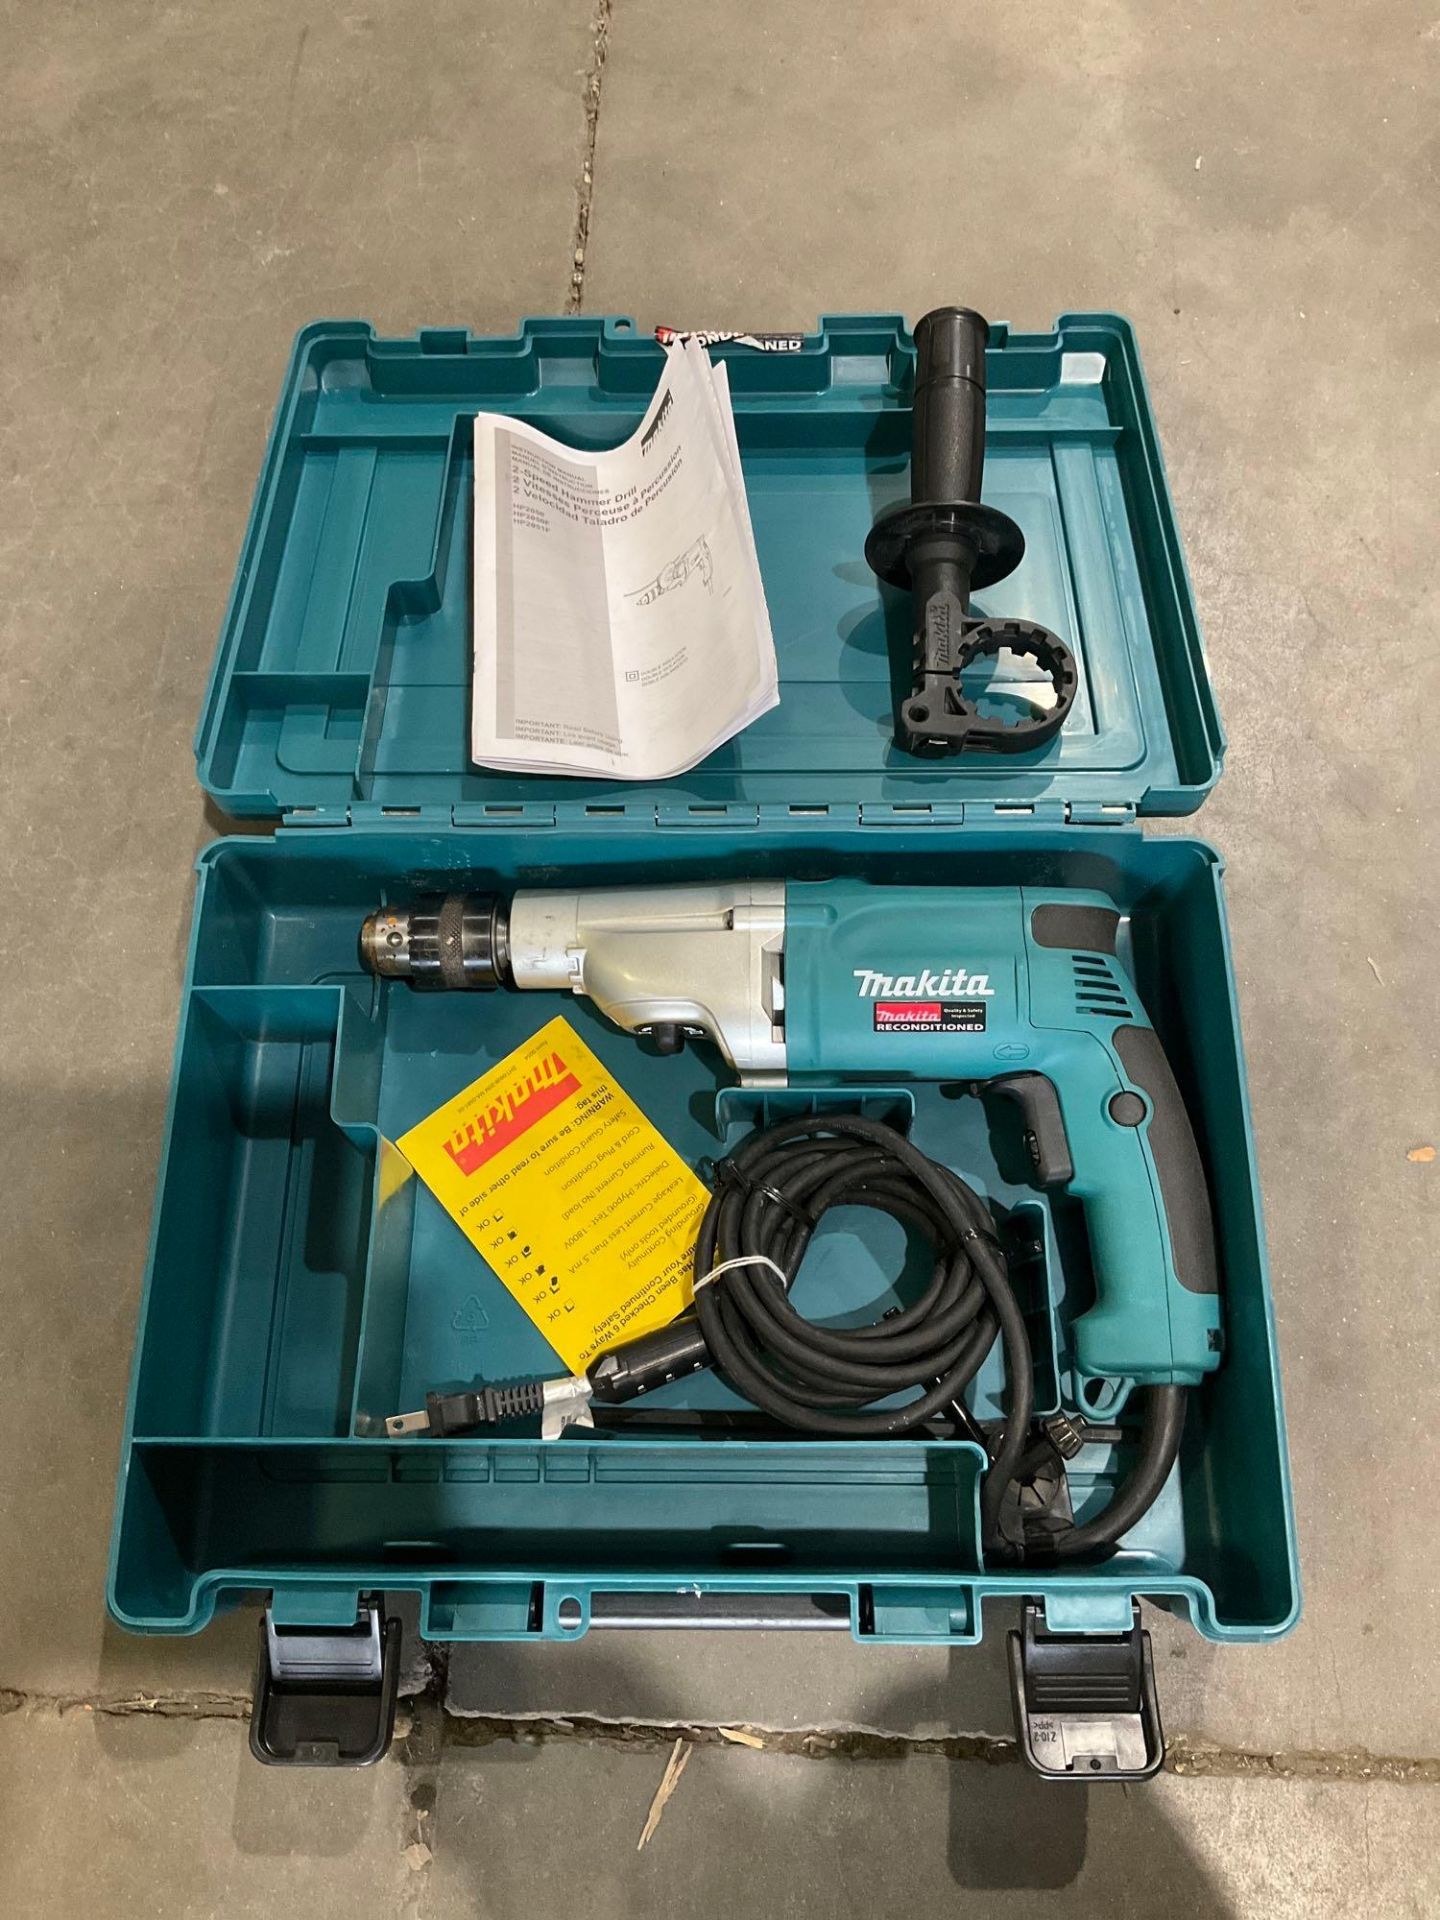 MAKITA 2 SPEED HAMMER DRILL MODEL HP2050WITH CARRYING CASE , RECONDITIONED, APPROX 120VOLTS, APPROX